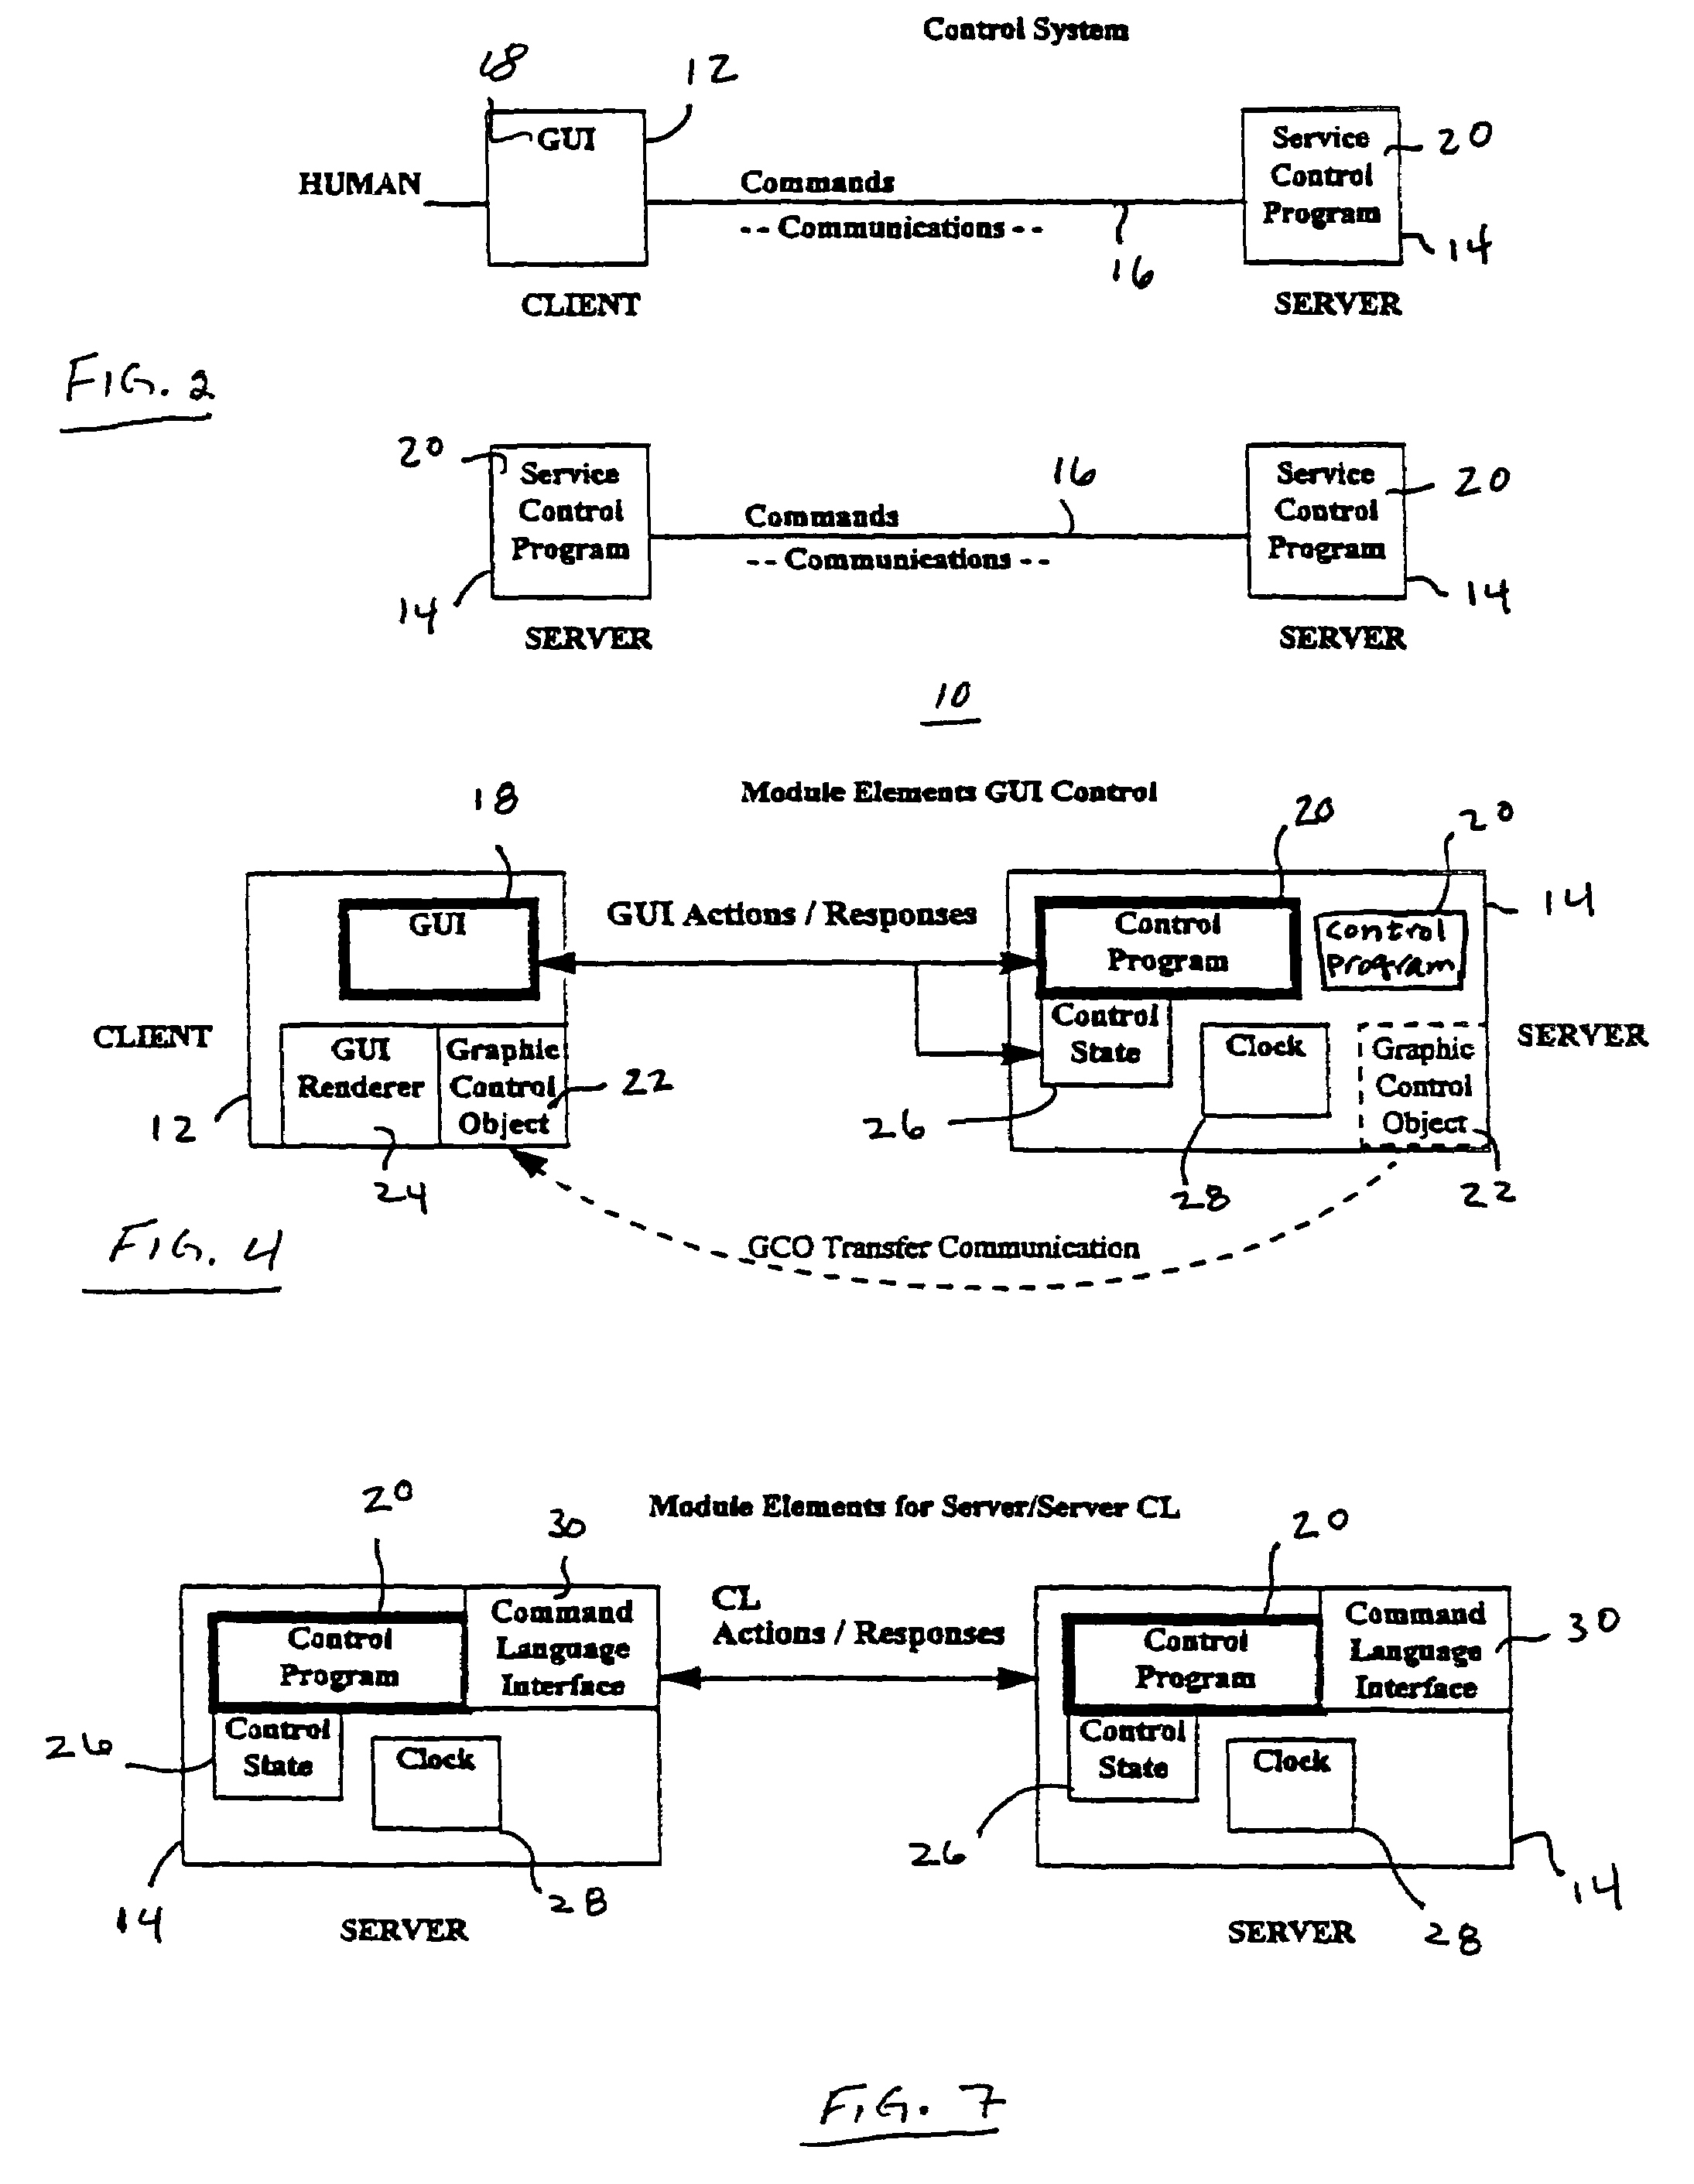 Method and apparatus for universally accessible command and control information in a network